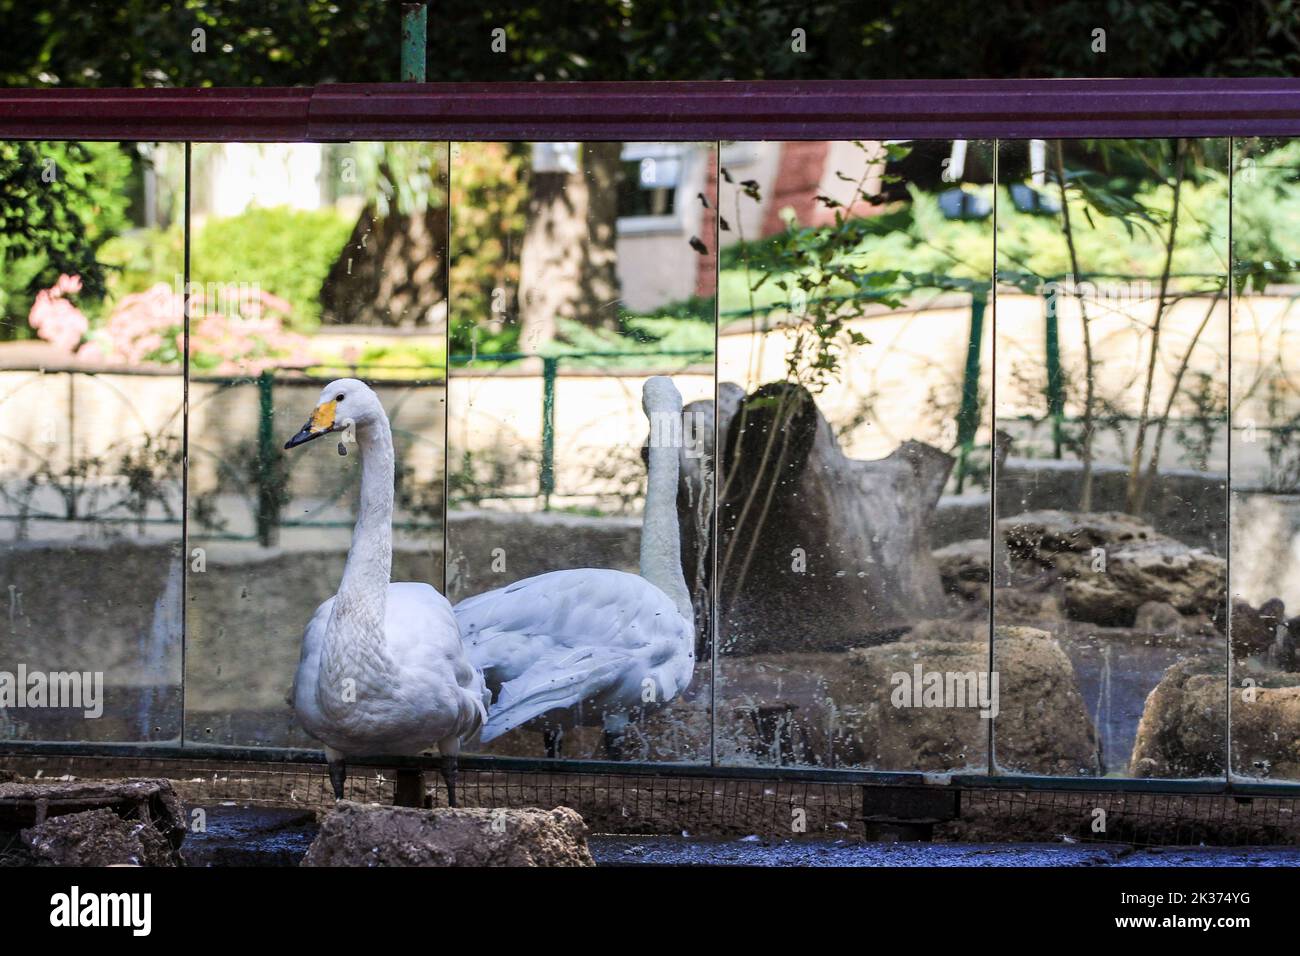 A swan seen standing near the mirror. One of the oldest in Ukraine, the Odessa Zoo was established in September 1922 In honor of the centenary of the zoo, solemn events were held:1.? memorial plaque was opened to its first director Heinrich Beizert. 2.Ukrposhta issued a special envelope and a stamp. The circulation is limited, only 200 pieces. Stamp cancellation was carried out right at the zoo. 3.Together with the Odessa mayor Gennady Trukhanov, the director of the zoo, Igor Belyakov, opened a new lion cub.In April, a pair of white lions from the Feldman Ecopark in Kharkiv arrived in Odessa. Stock Photo